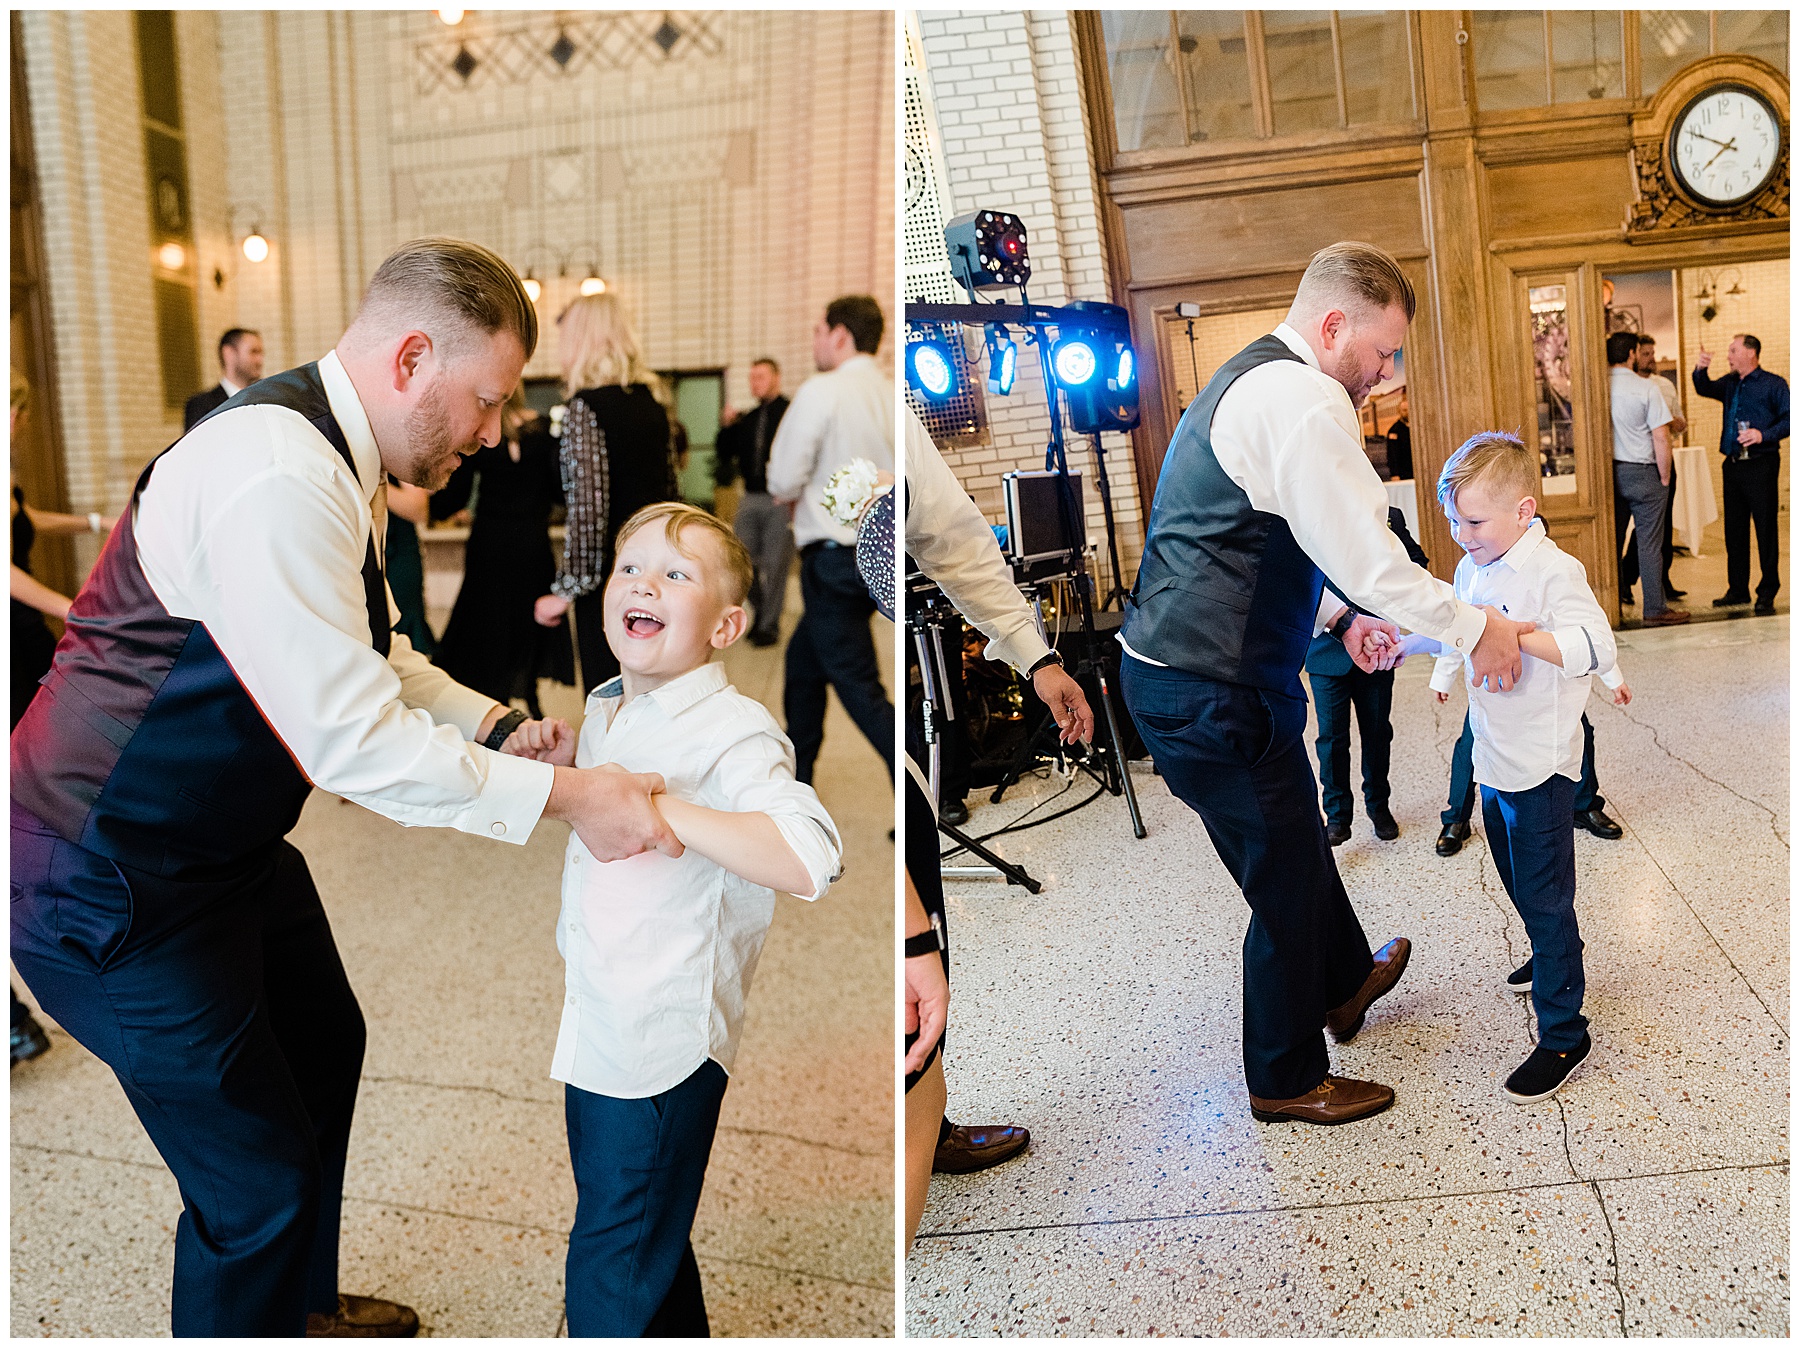 groom dancing with son at wedding reception